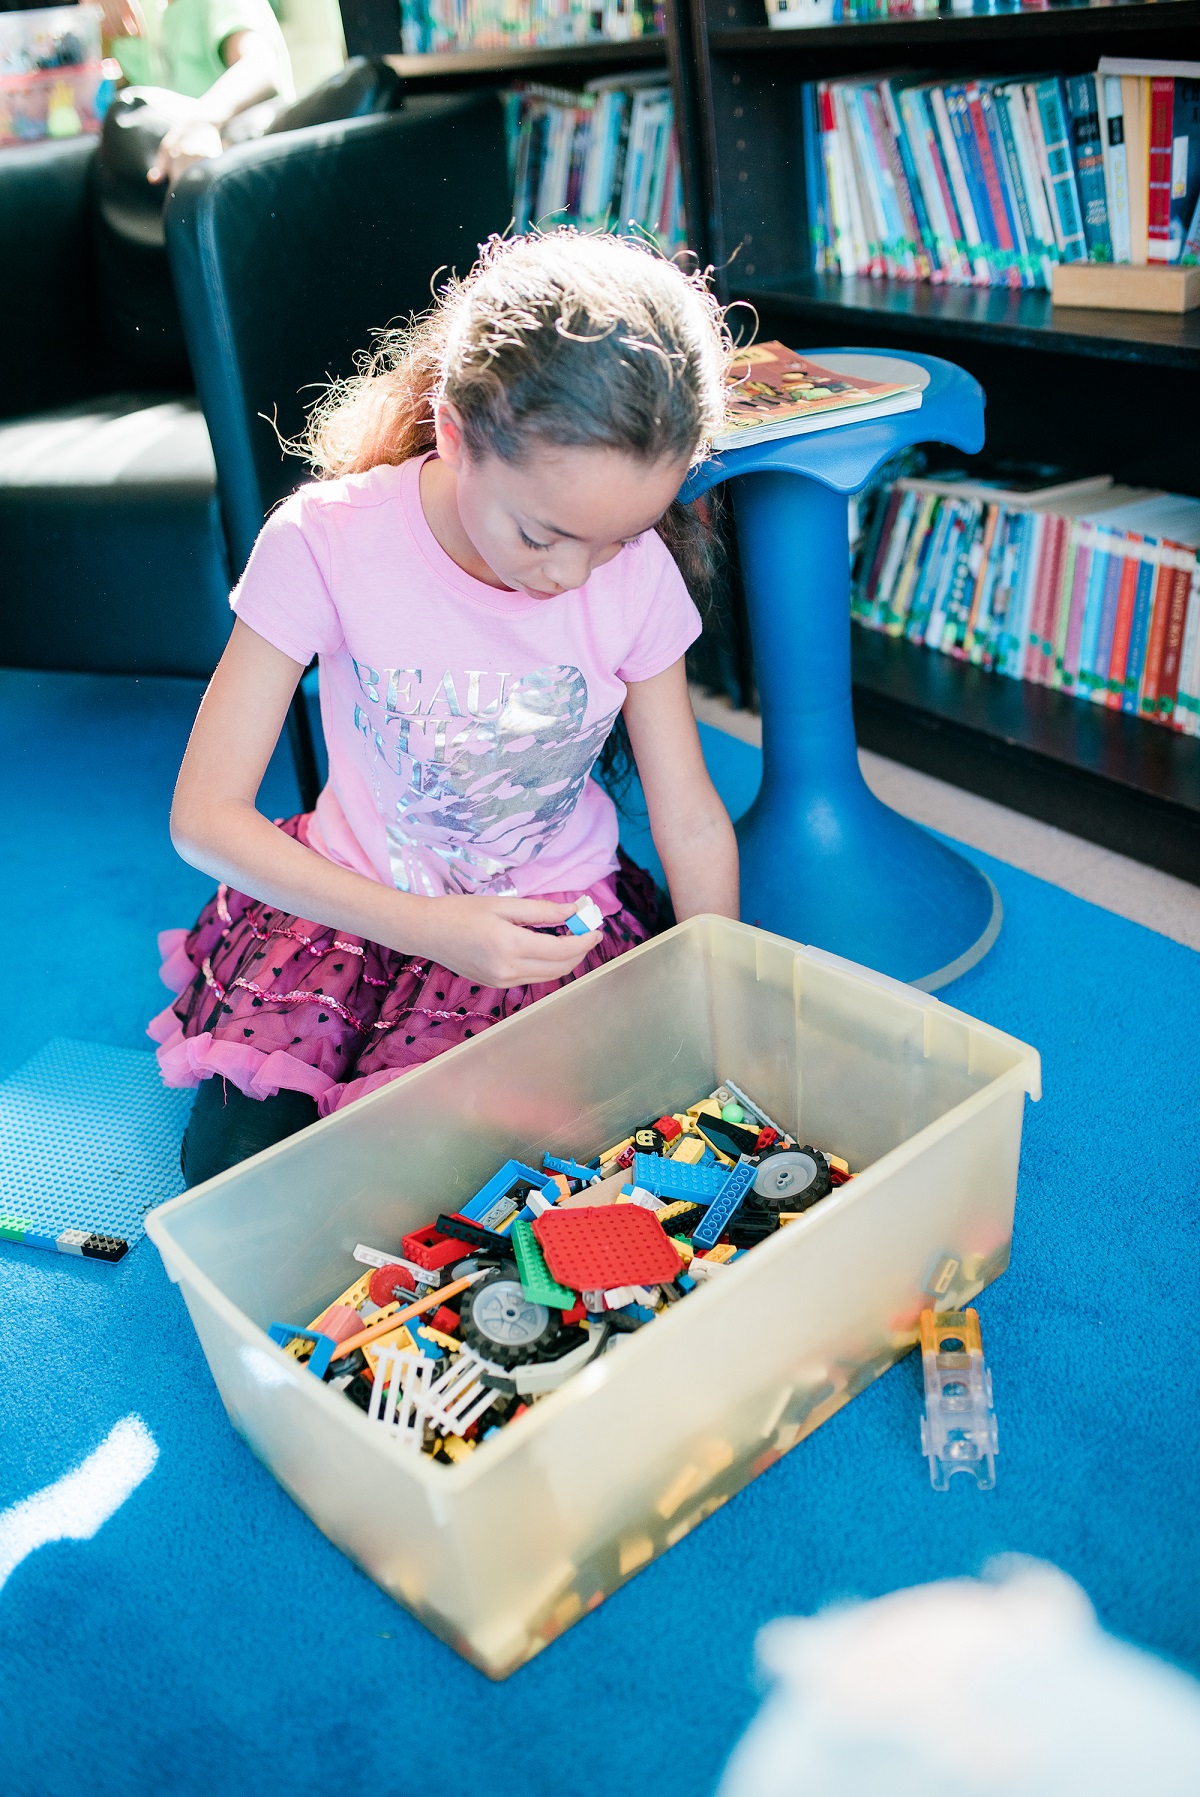 A little girl looks at a box of STEM toys during an open play time.